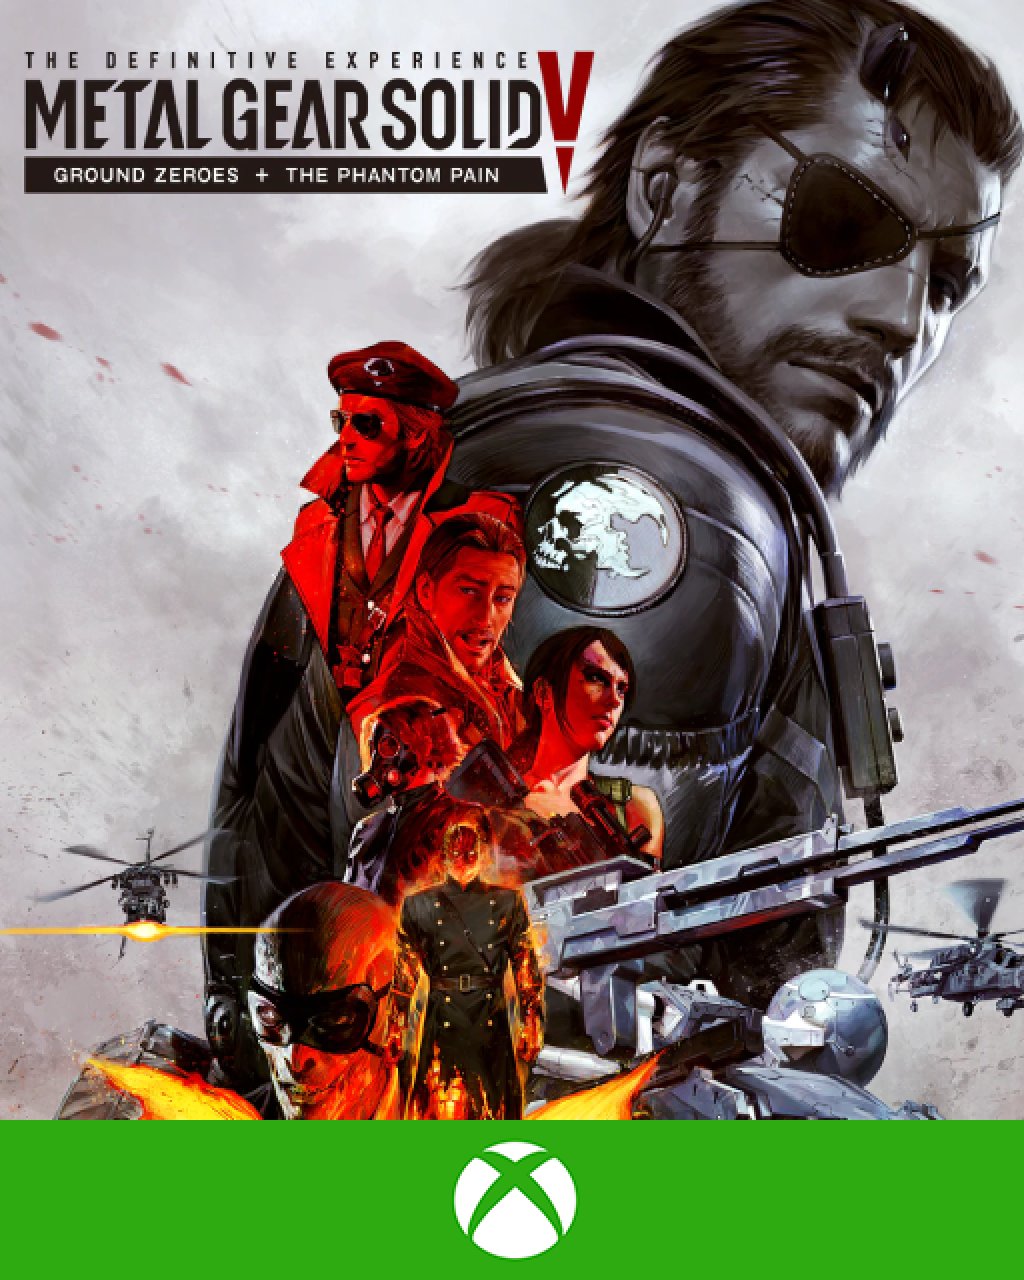 ESD METAL GEAR SOLID V The Definitive Experience